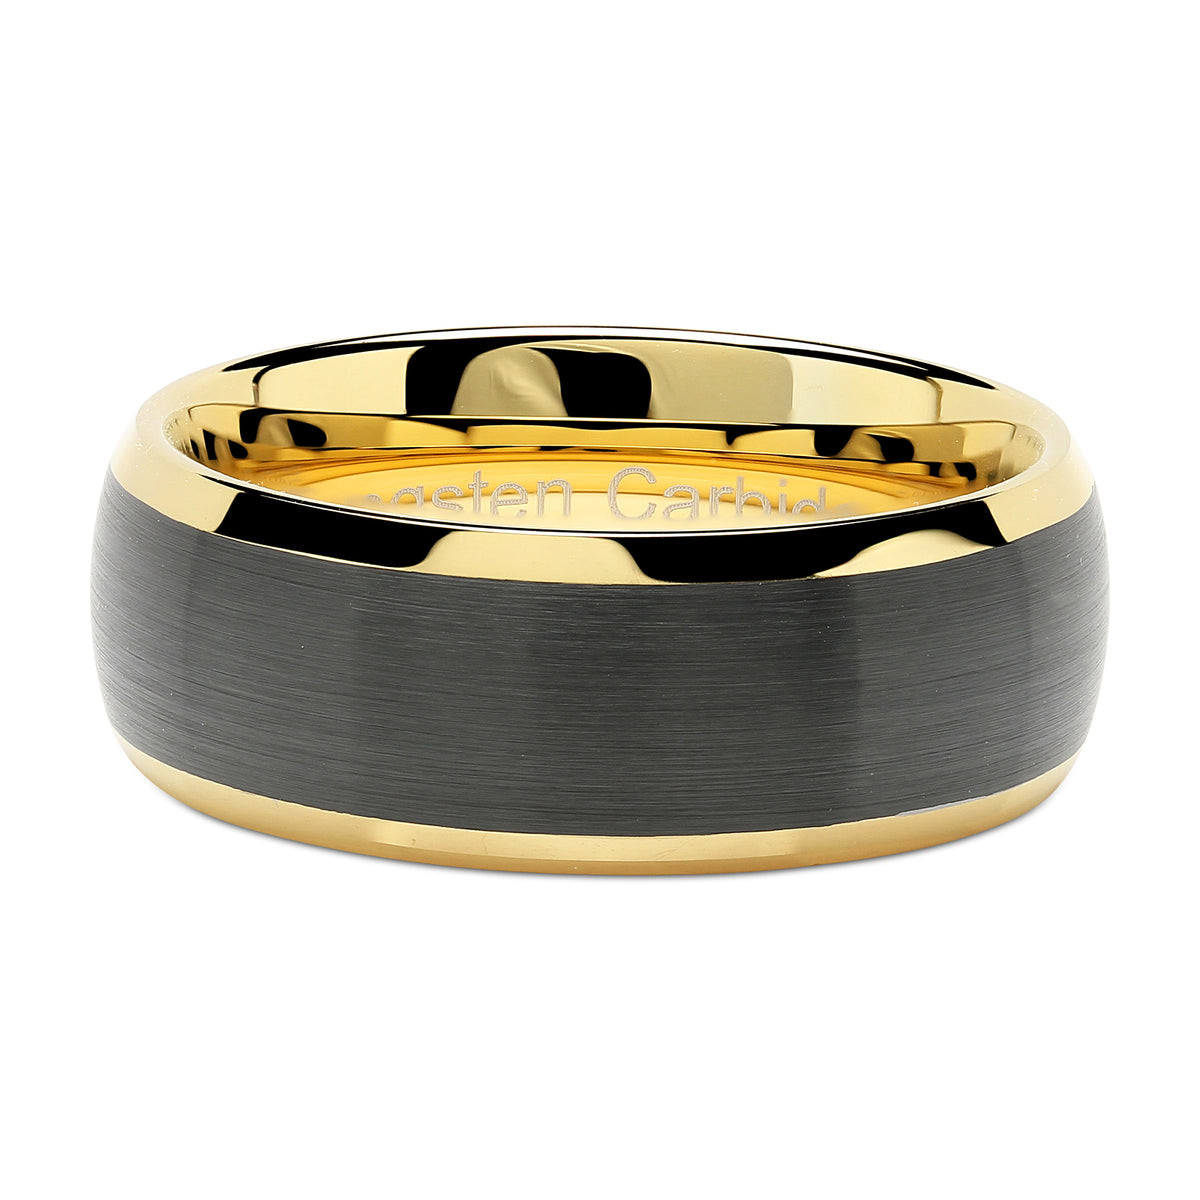 100s Jewelry Tungsten Ring for Men Wedding Band Black Sandstone Inlaid Gold Dome Size 6-16, 12 - 100s Jewelry